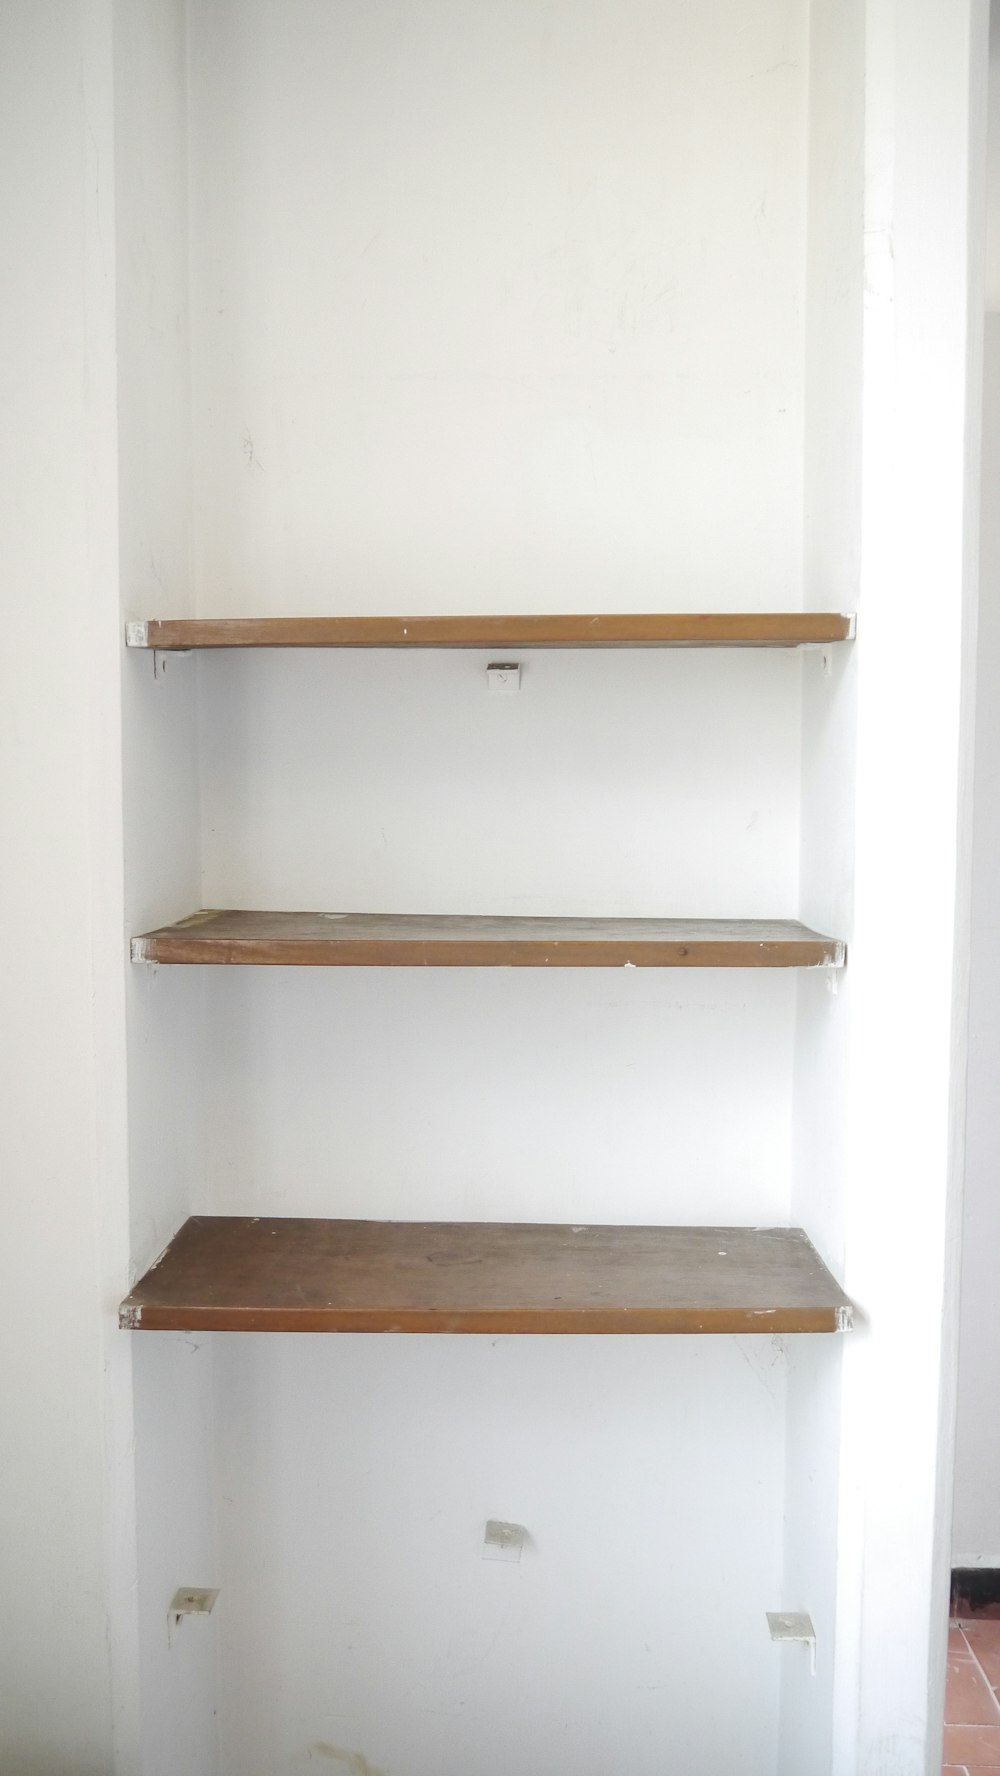 empty shelves in a white room with a tile floor